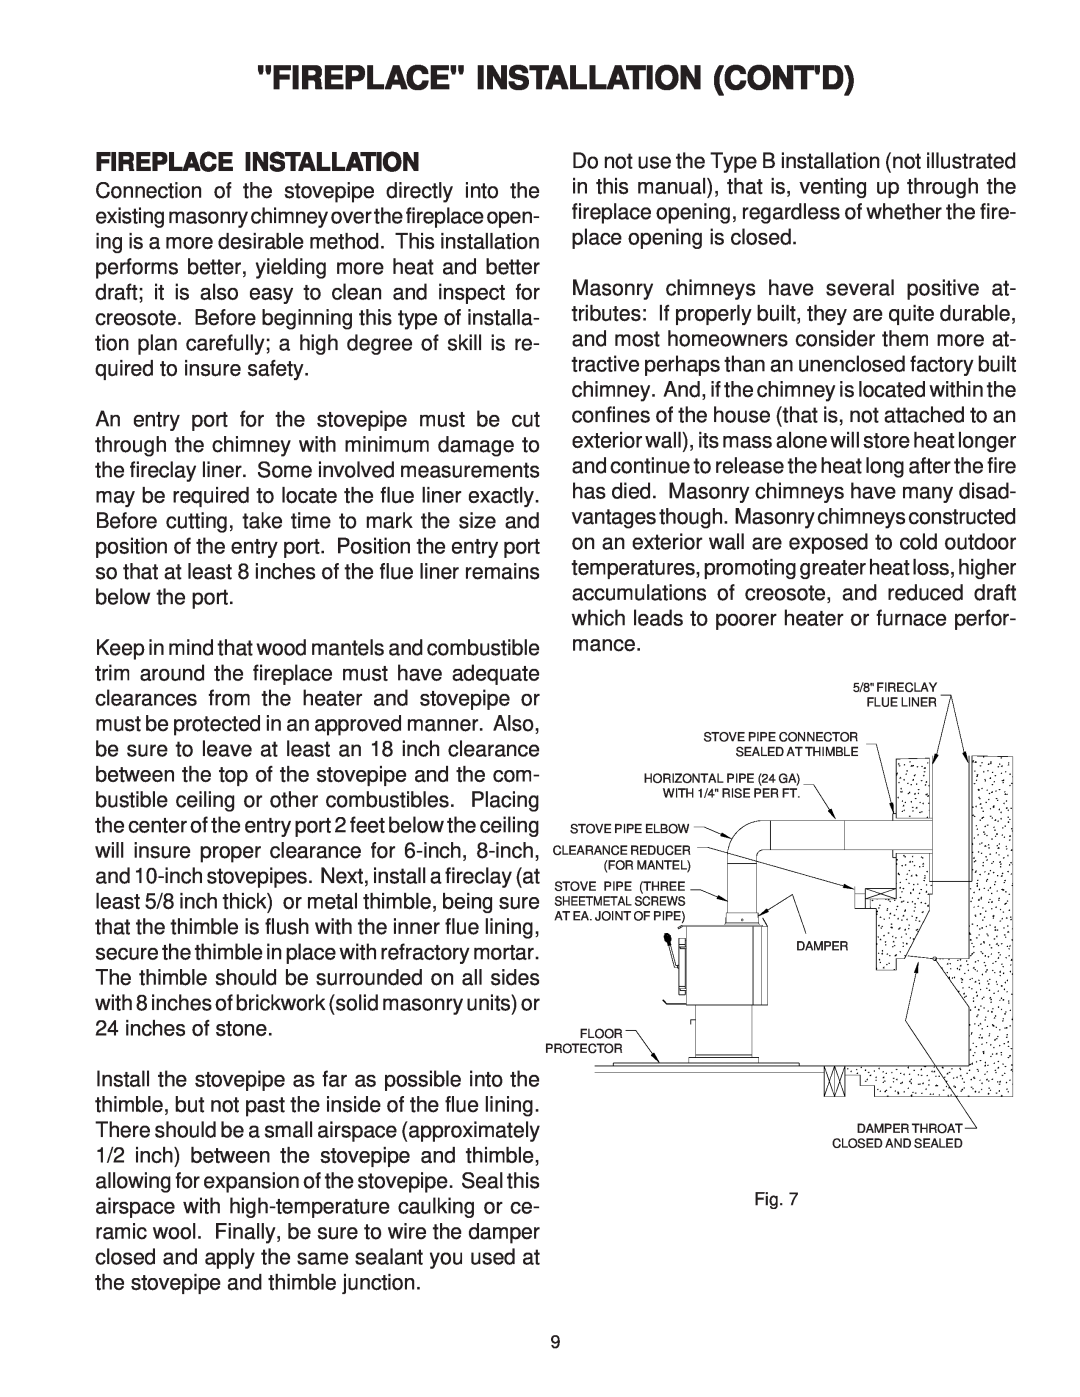 United States Stove 2007 owner manual Fireplace Installation Contd 